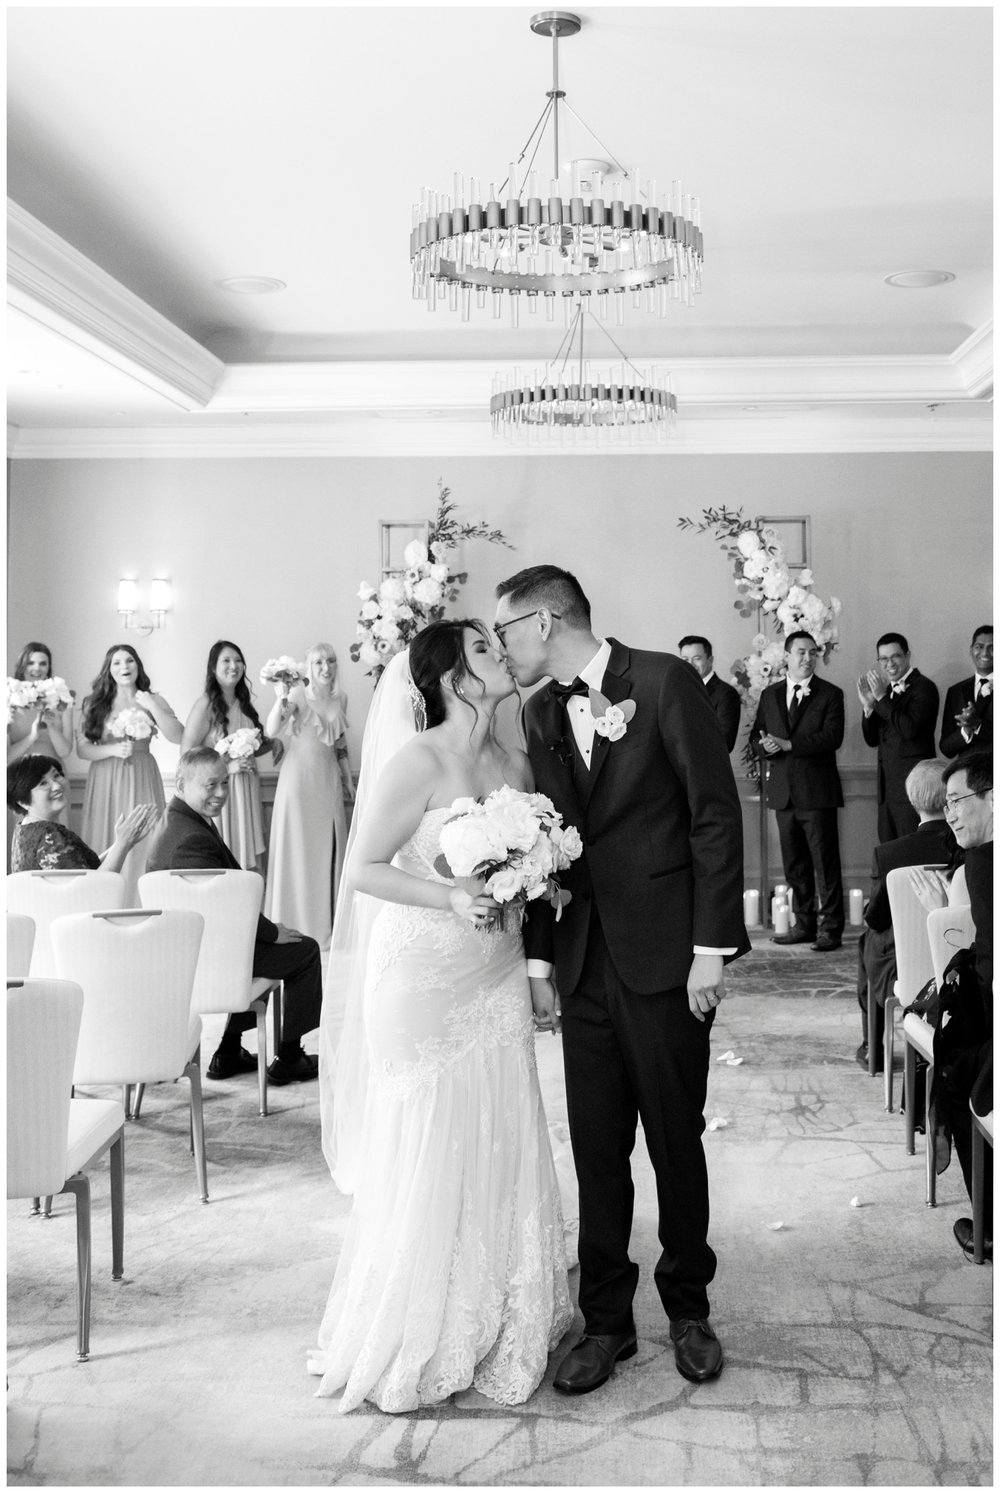 black and white image of bride and groom kissing after indoor wedding ceremony